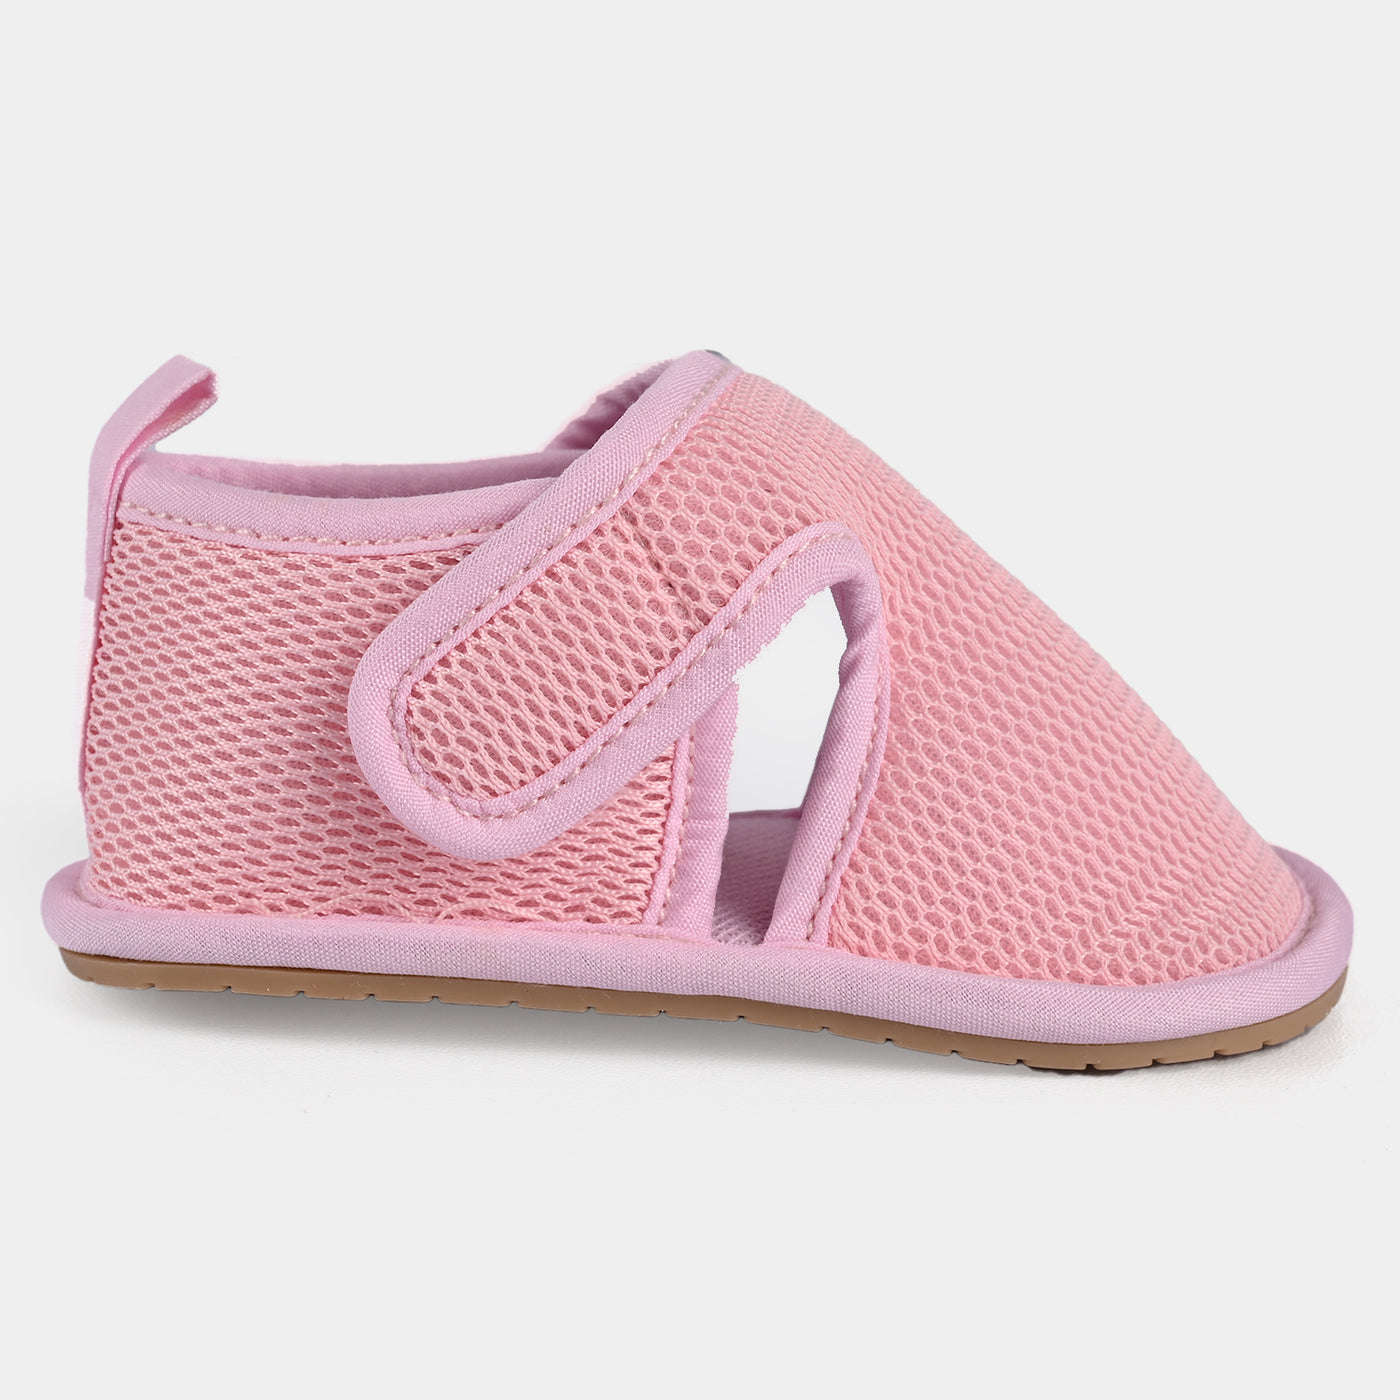 Baby Girls Shoes B347-Pink